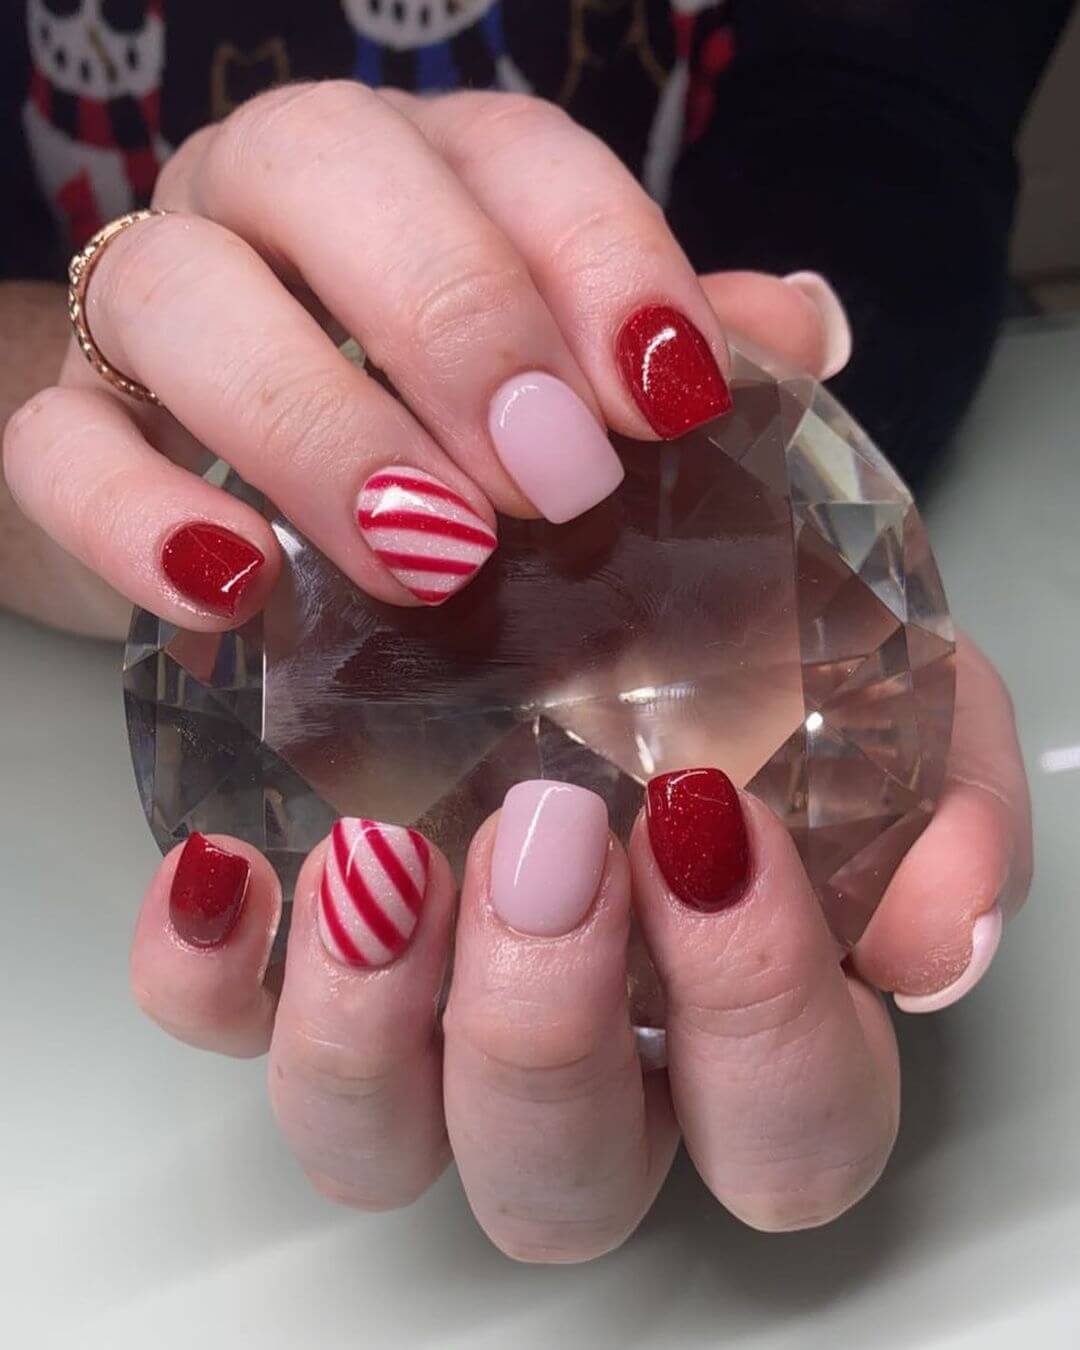 Red and White Striped Nail Art Candy Cane Nail Art Designs for the Christmas Season